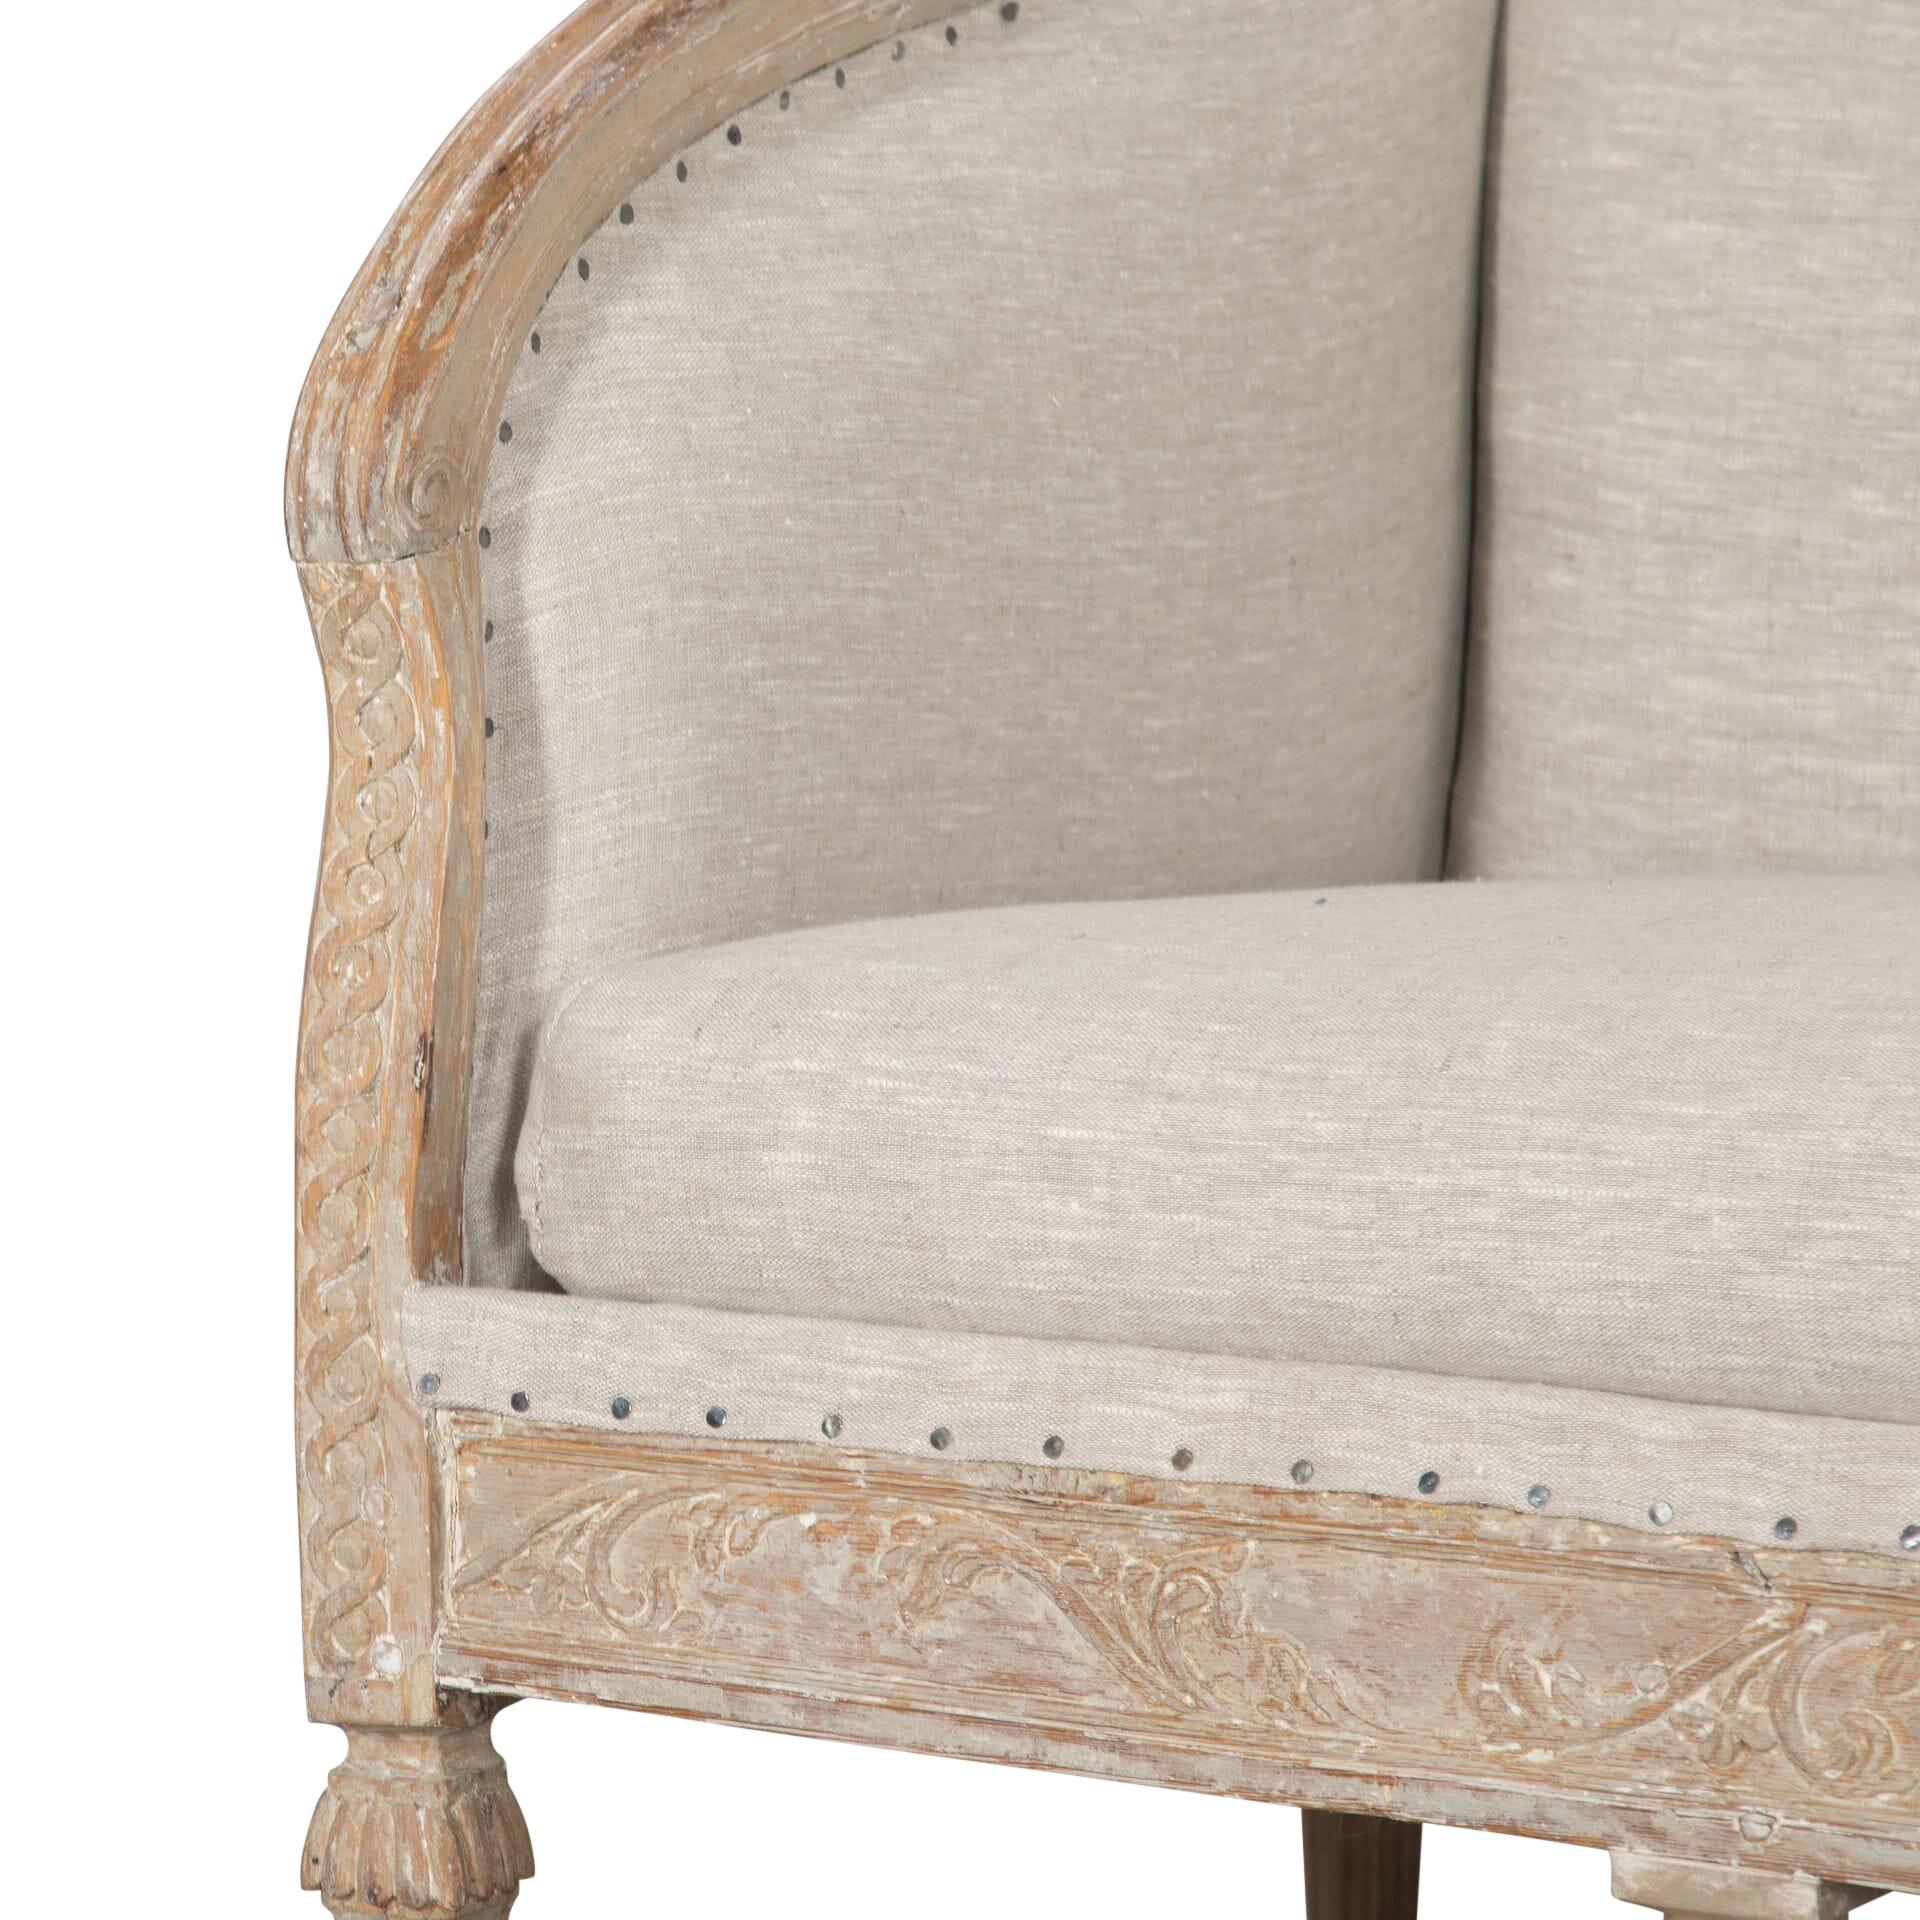 18th Century Gustavian sofa.
Scraped to original paint with exquisite carving and recently reupholstered in linen.